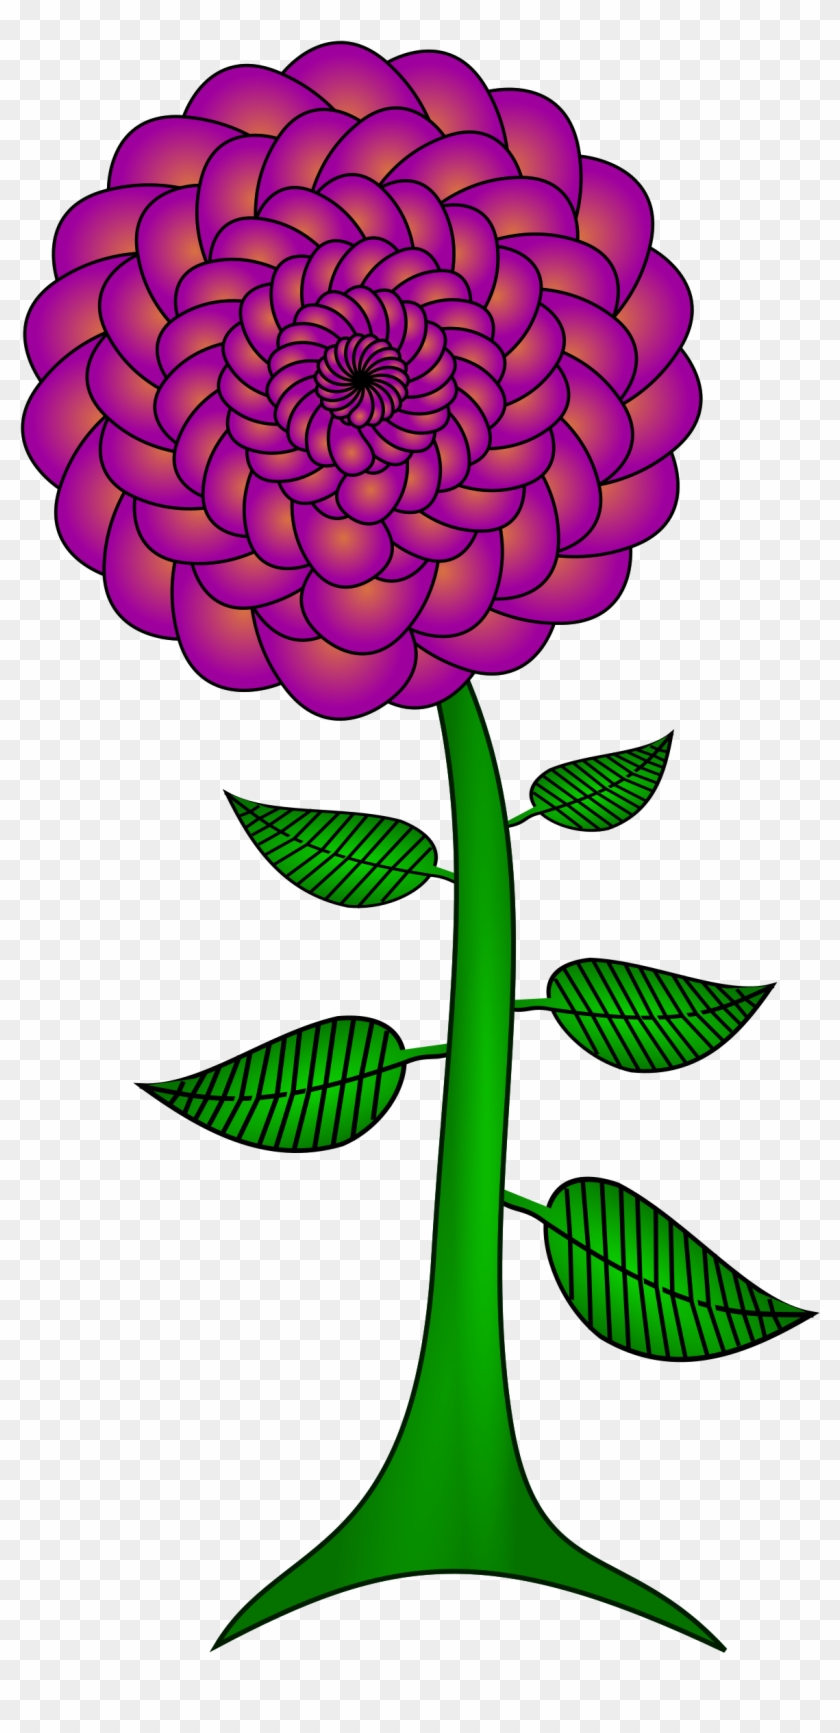 This Free Icons Png Design Of Paisley Flower Clipart #719037